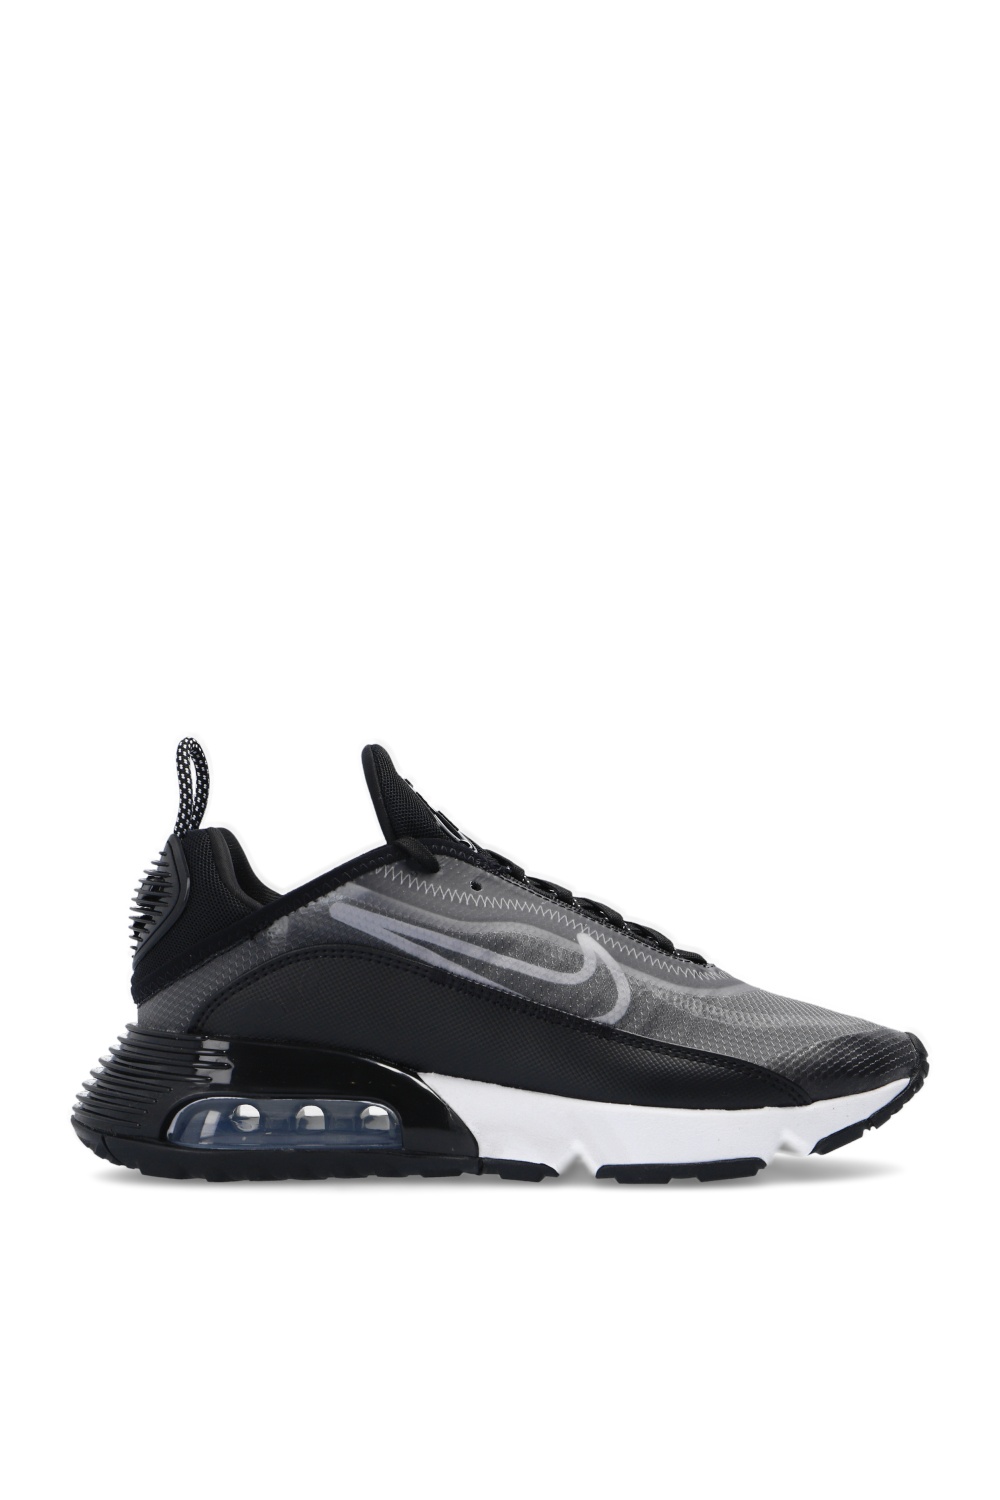 nike air max 2090 trainers in black and silver